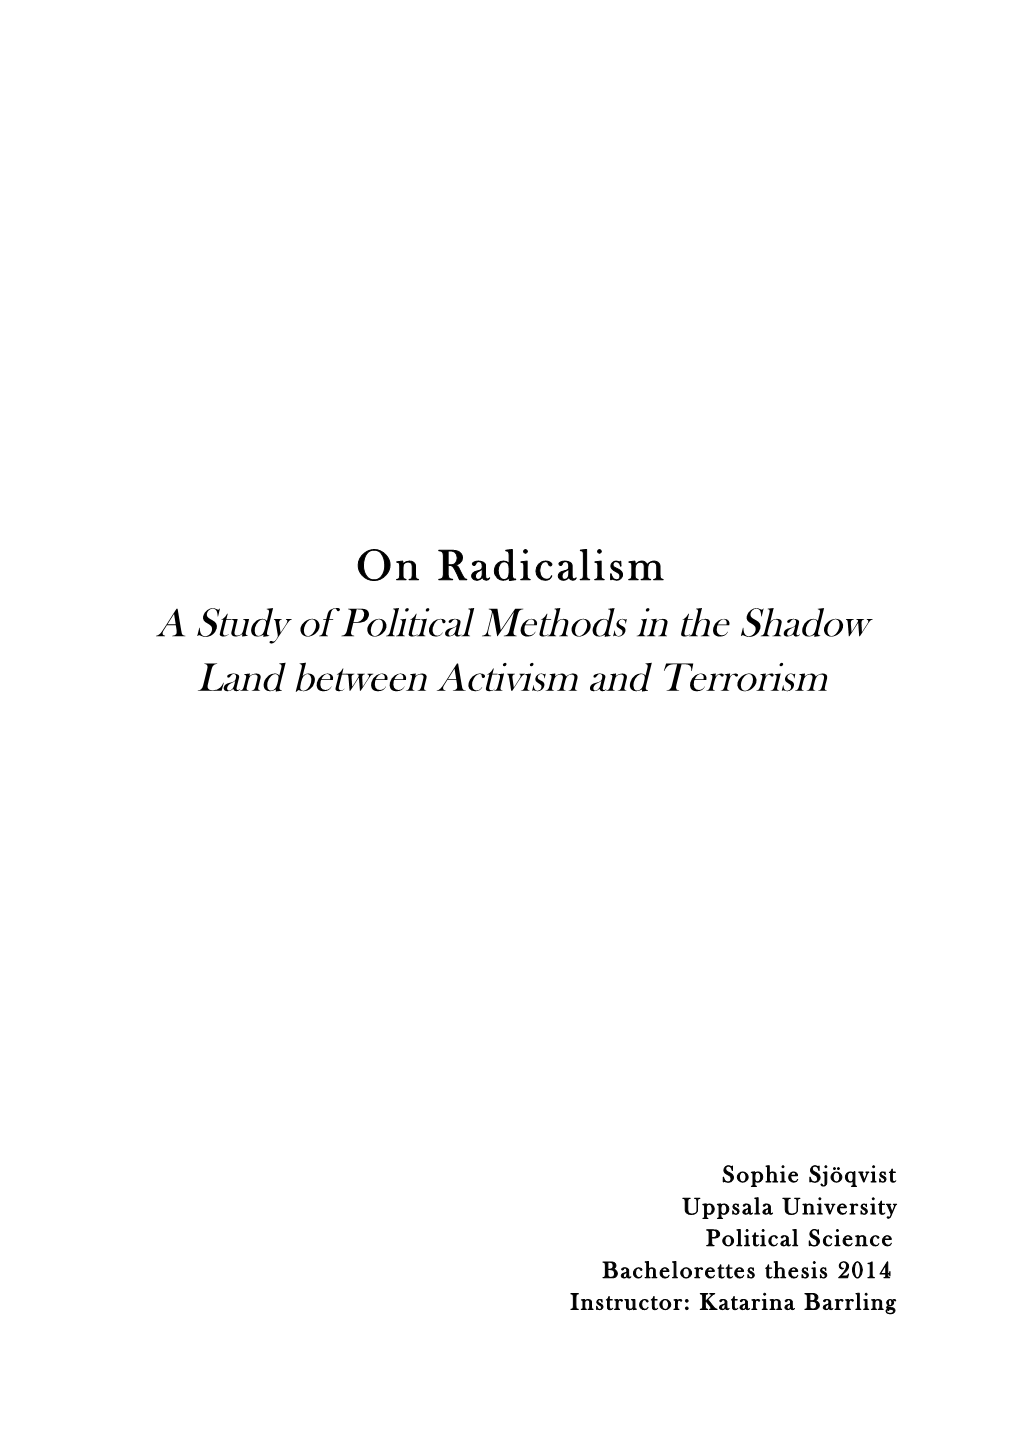 On Radicalism a Study of Political Methods in the Shadow Land Between Activism and Terrorism